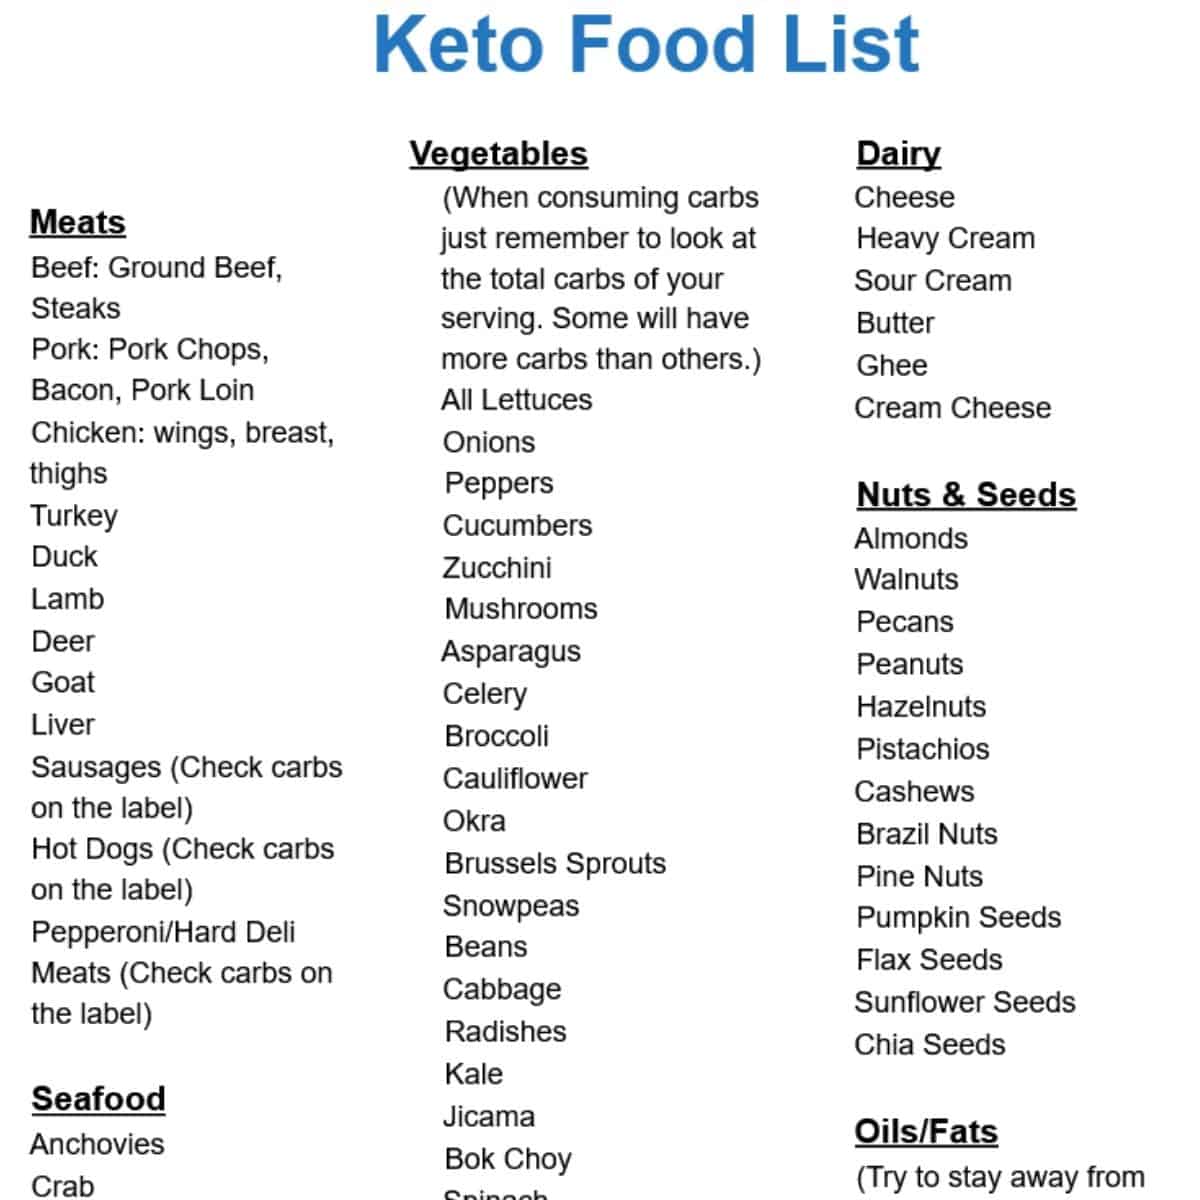 keto food list - The Ultimate Keto Guide to Keep Total Carbs Under 10 Grams